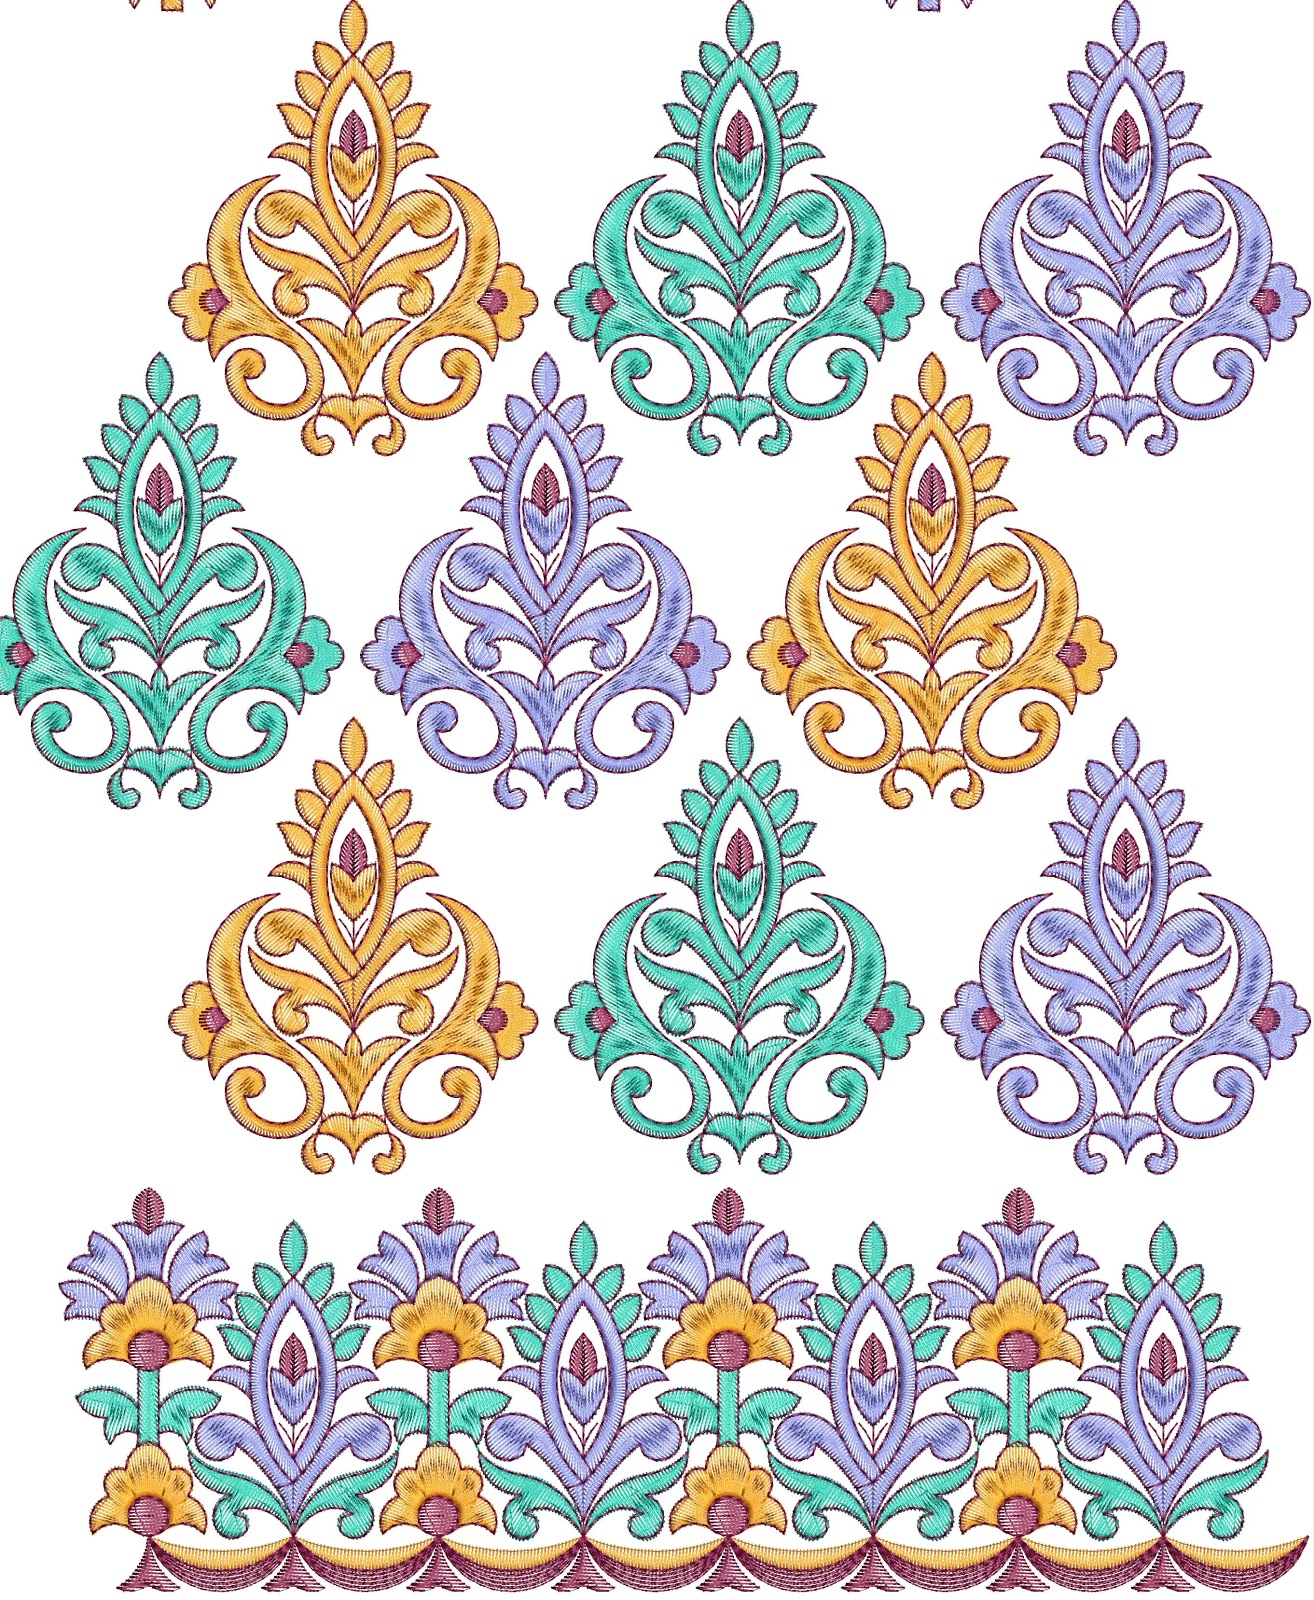 we offer this free all over embroidery design for you to download and 